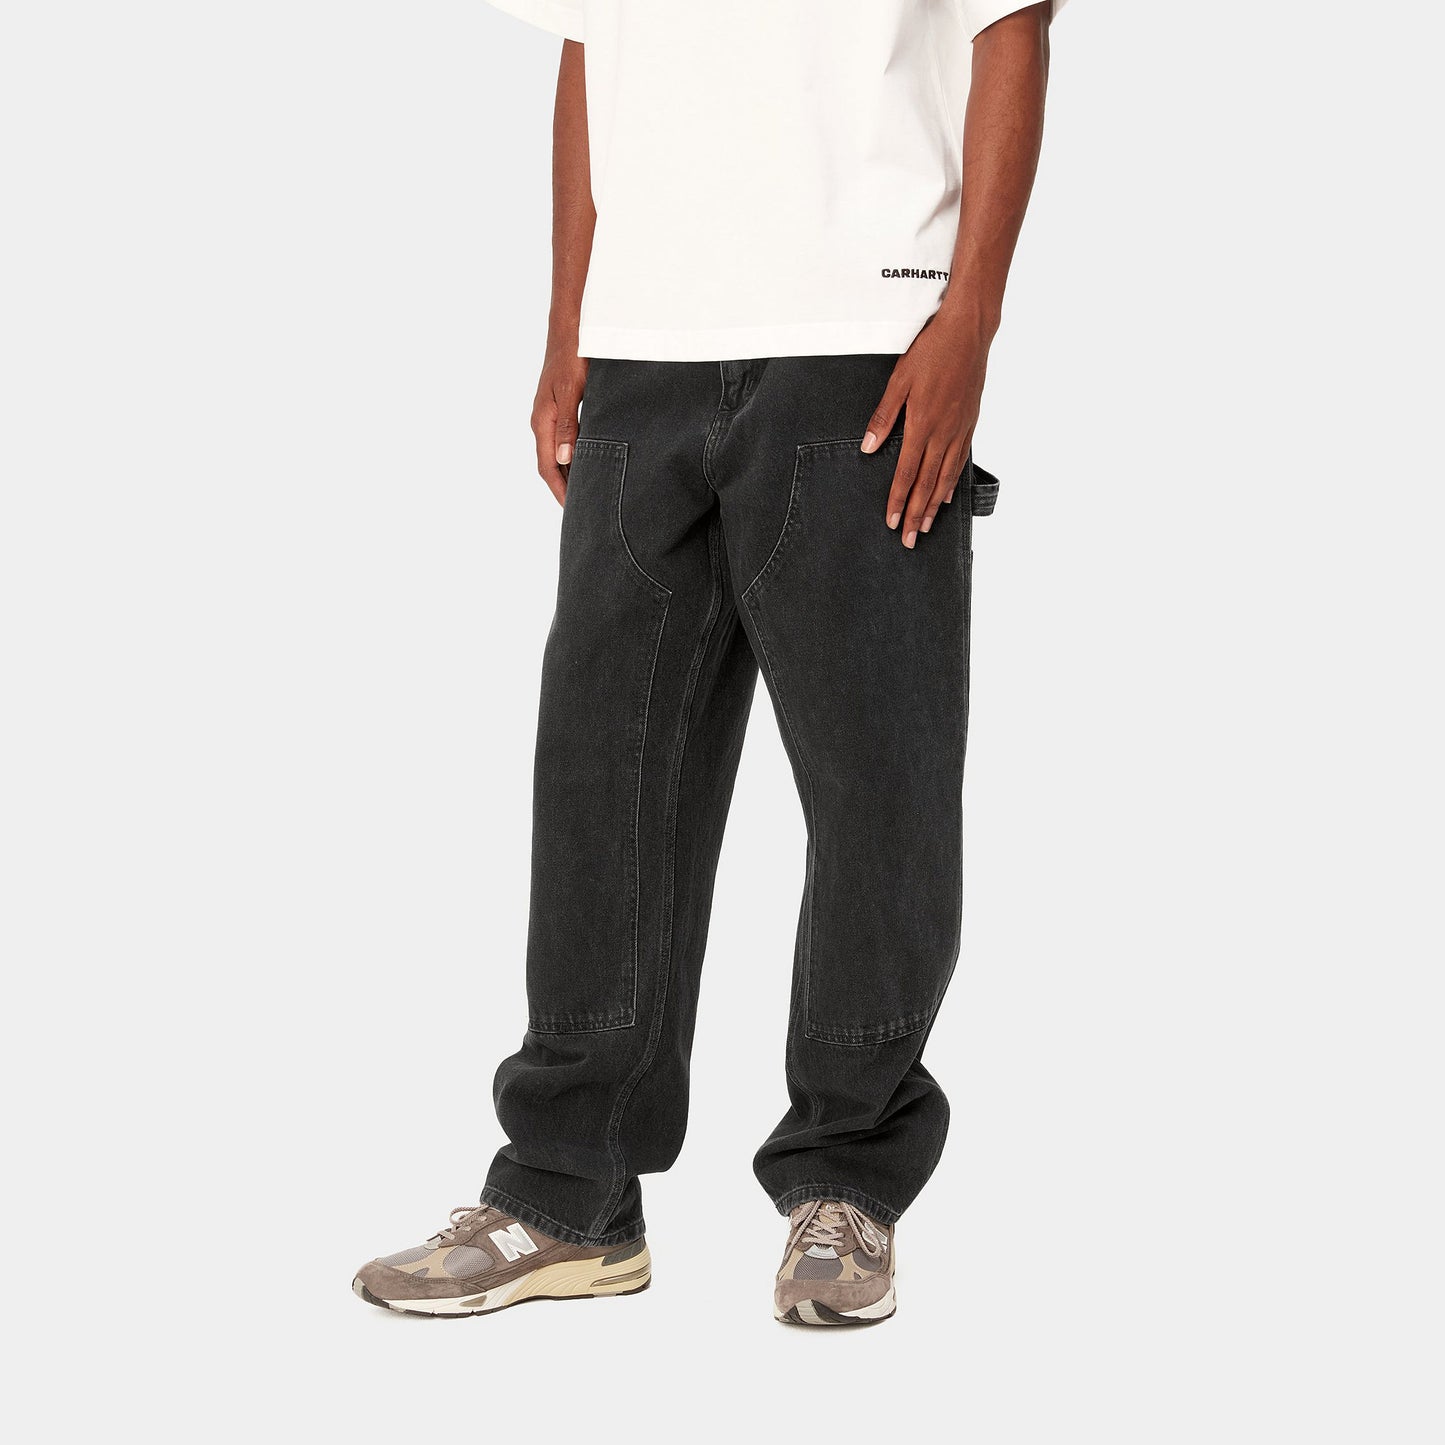 Carhartt WIP Double Knee Pant Black Stone Washed